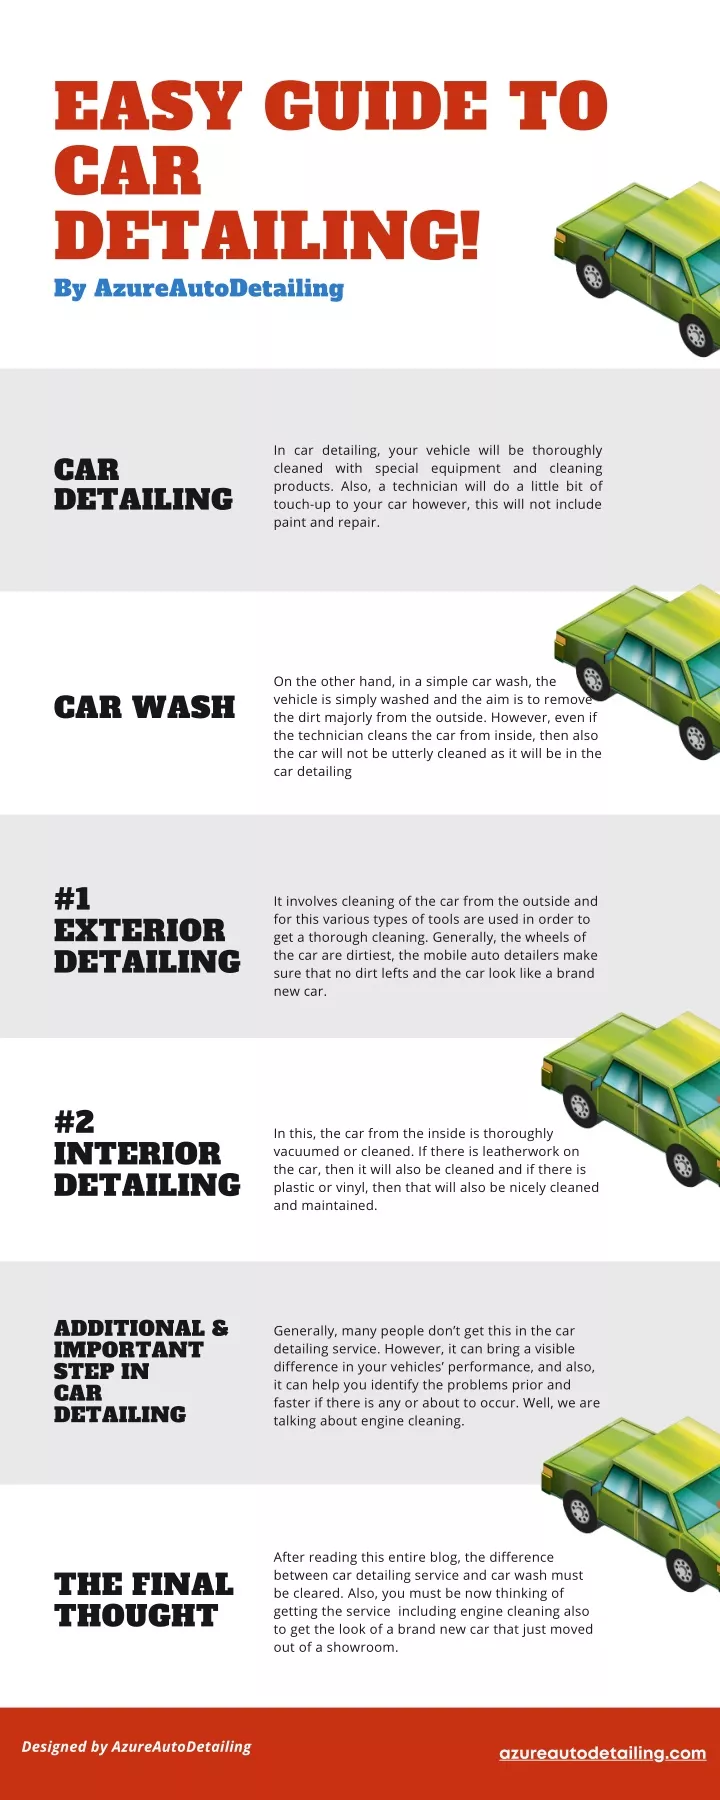 easy guide to car detailing by azureautodetailing